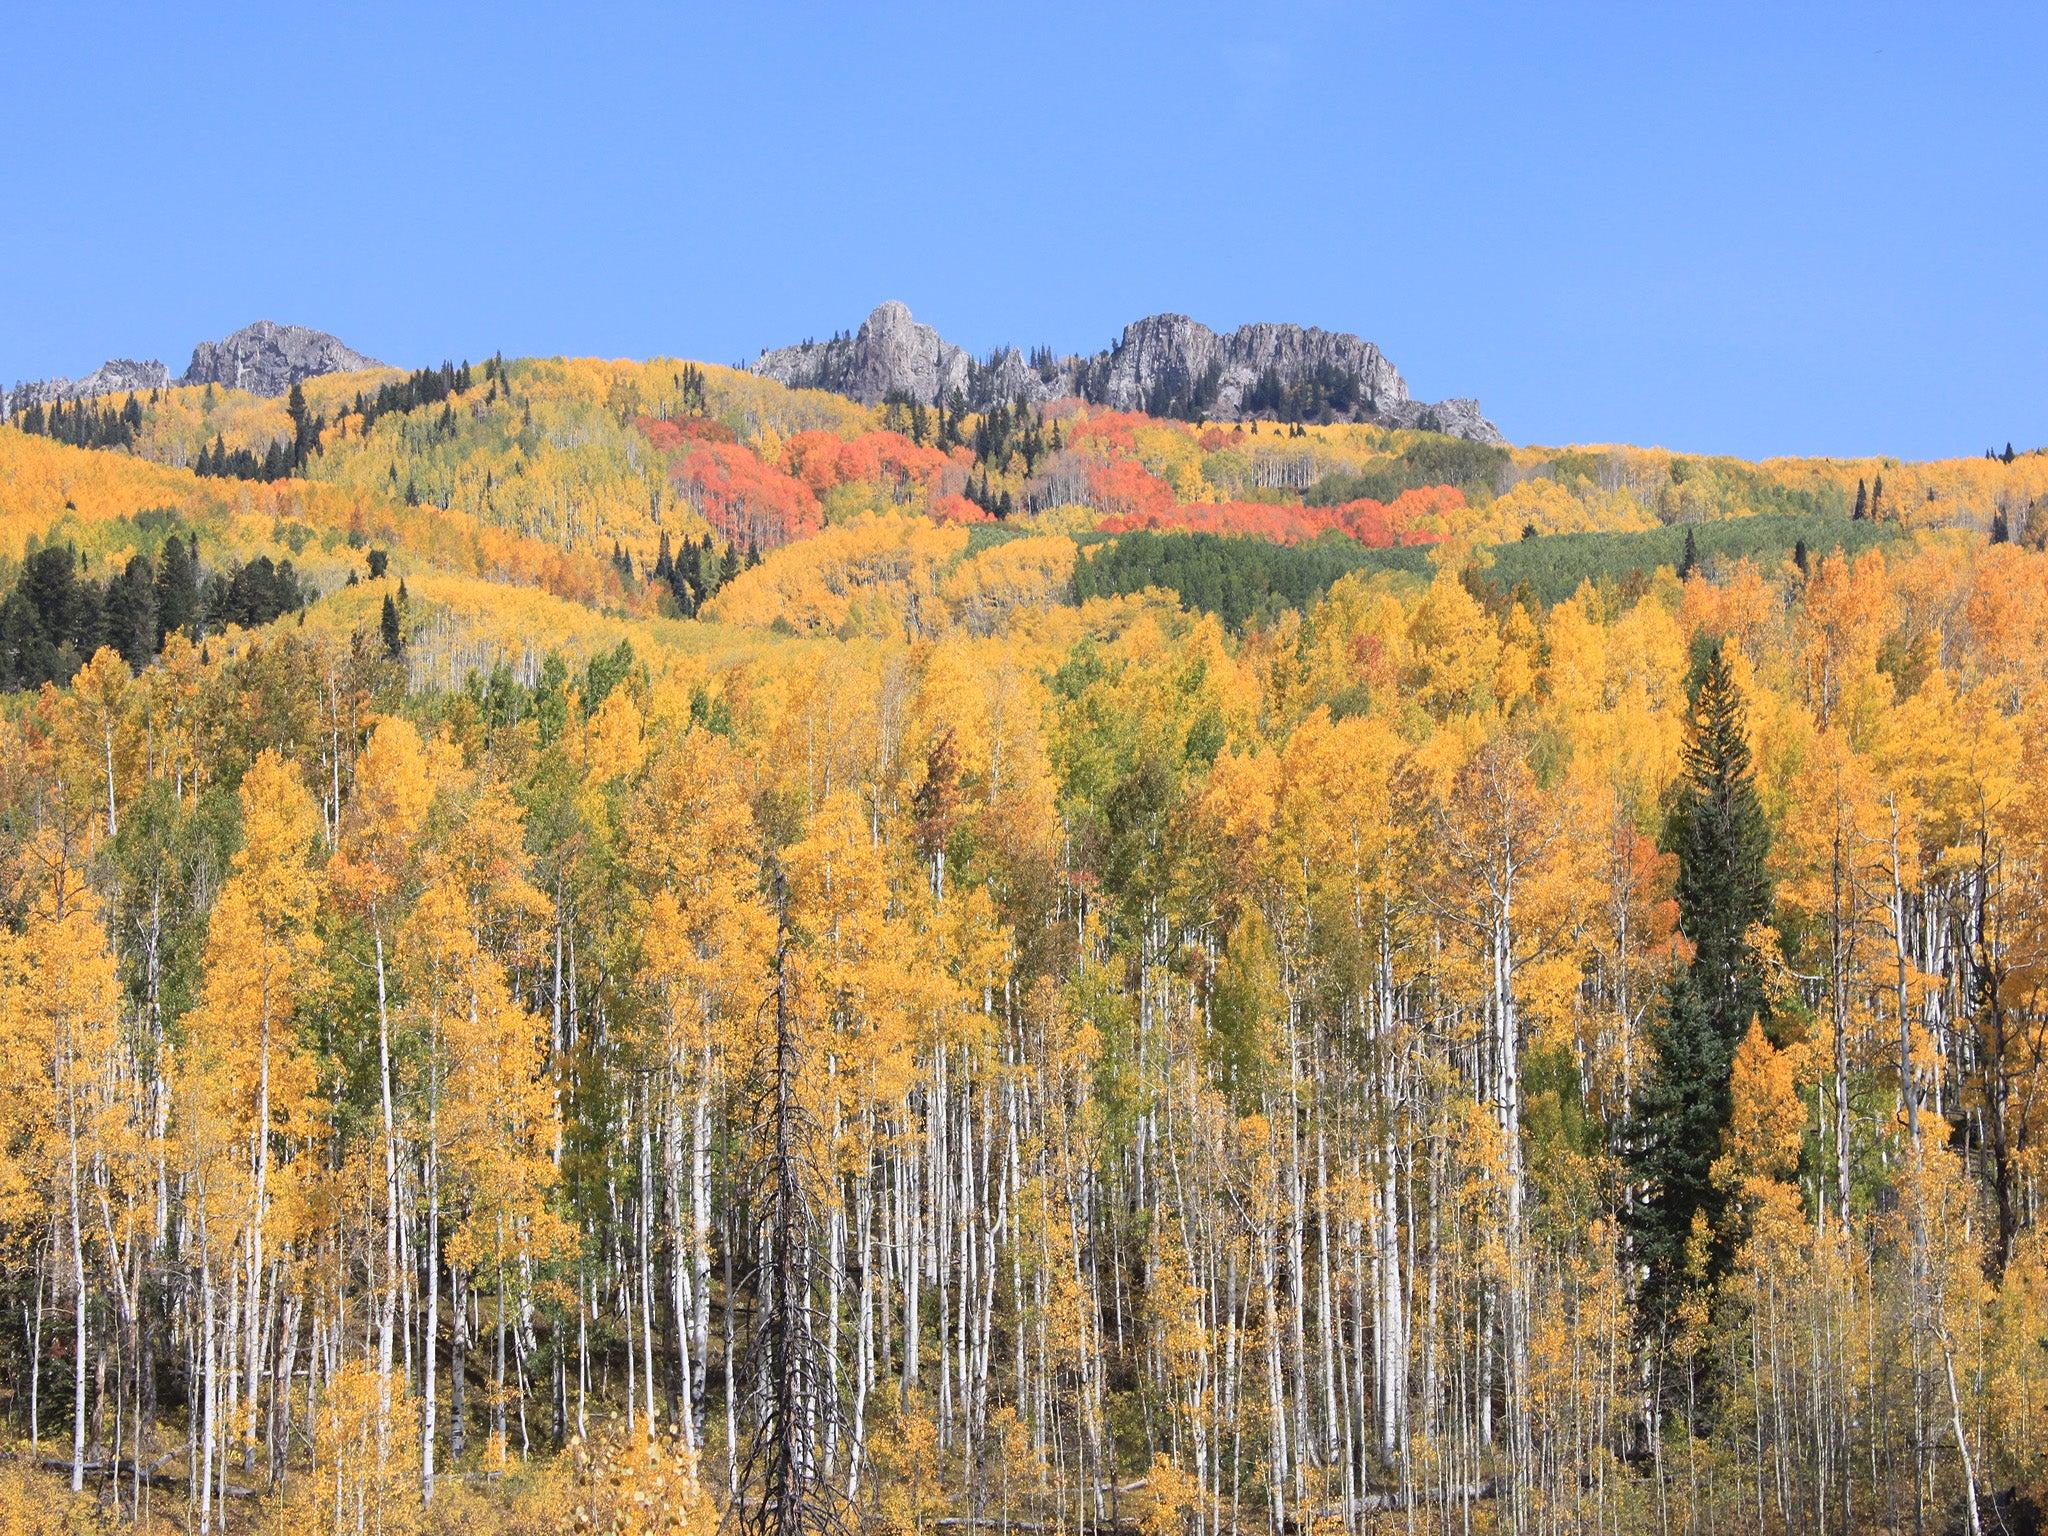 Climate change could eliminate aspen forests in the western